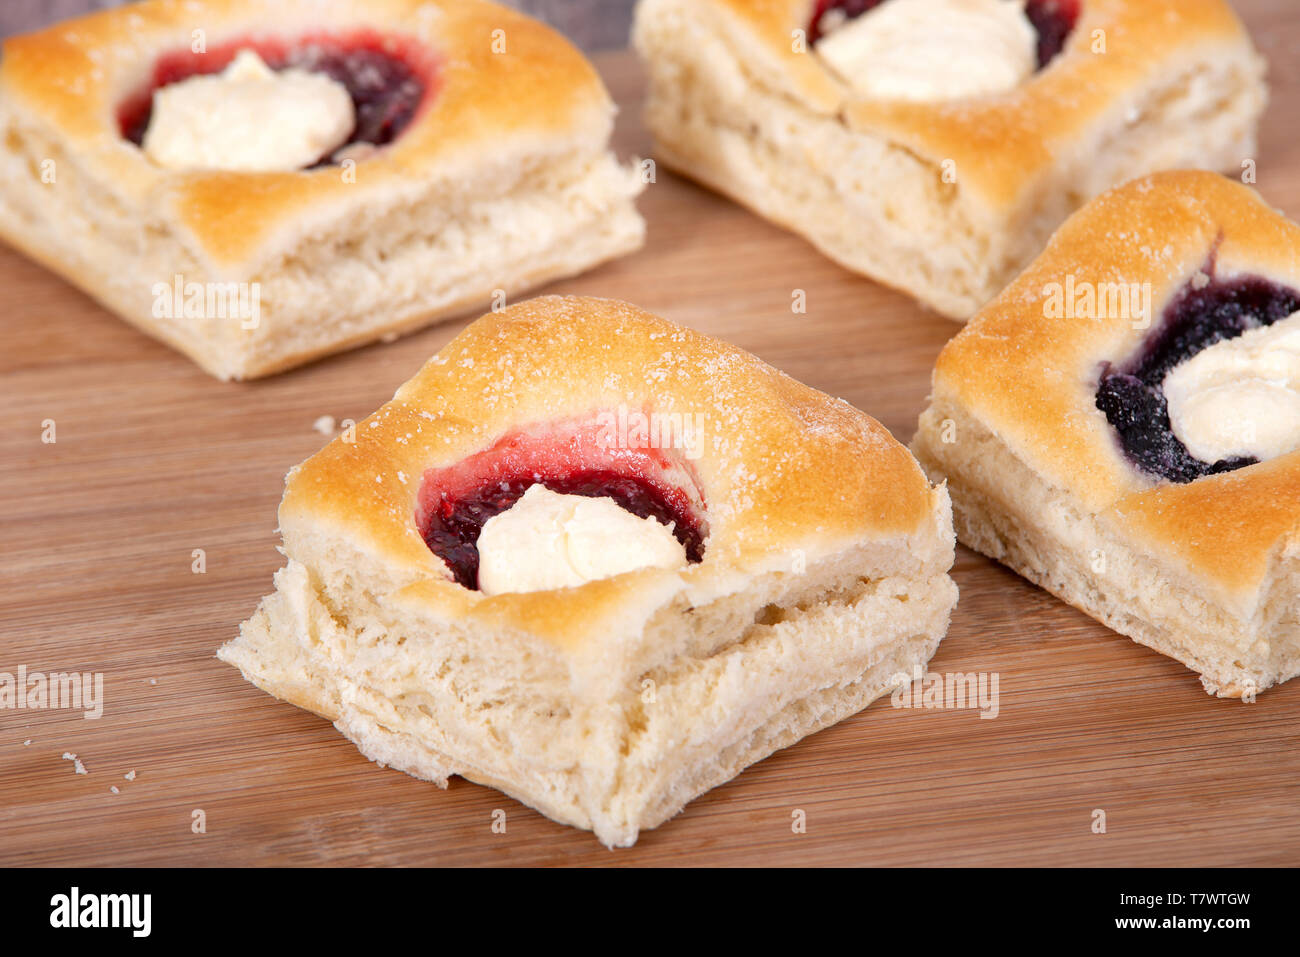 Assortment of sweet Kolache, Czech pastry cakes, with fruit, berry and cream cheese fillings. Stock Photo